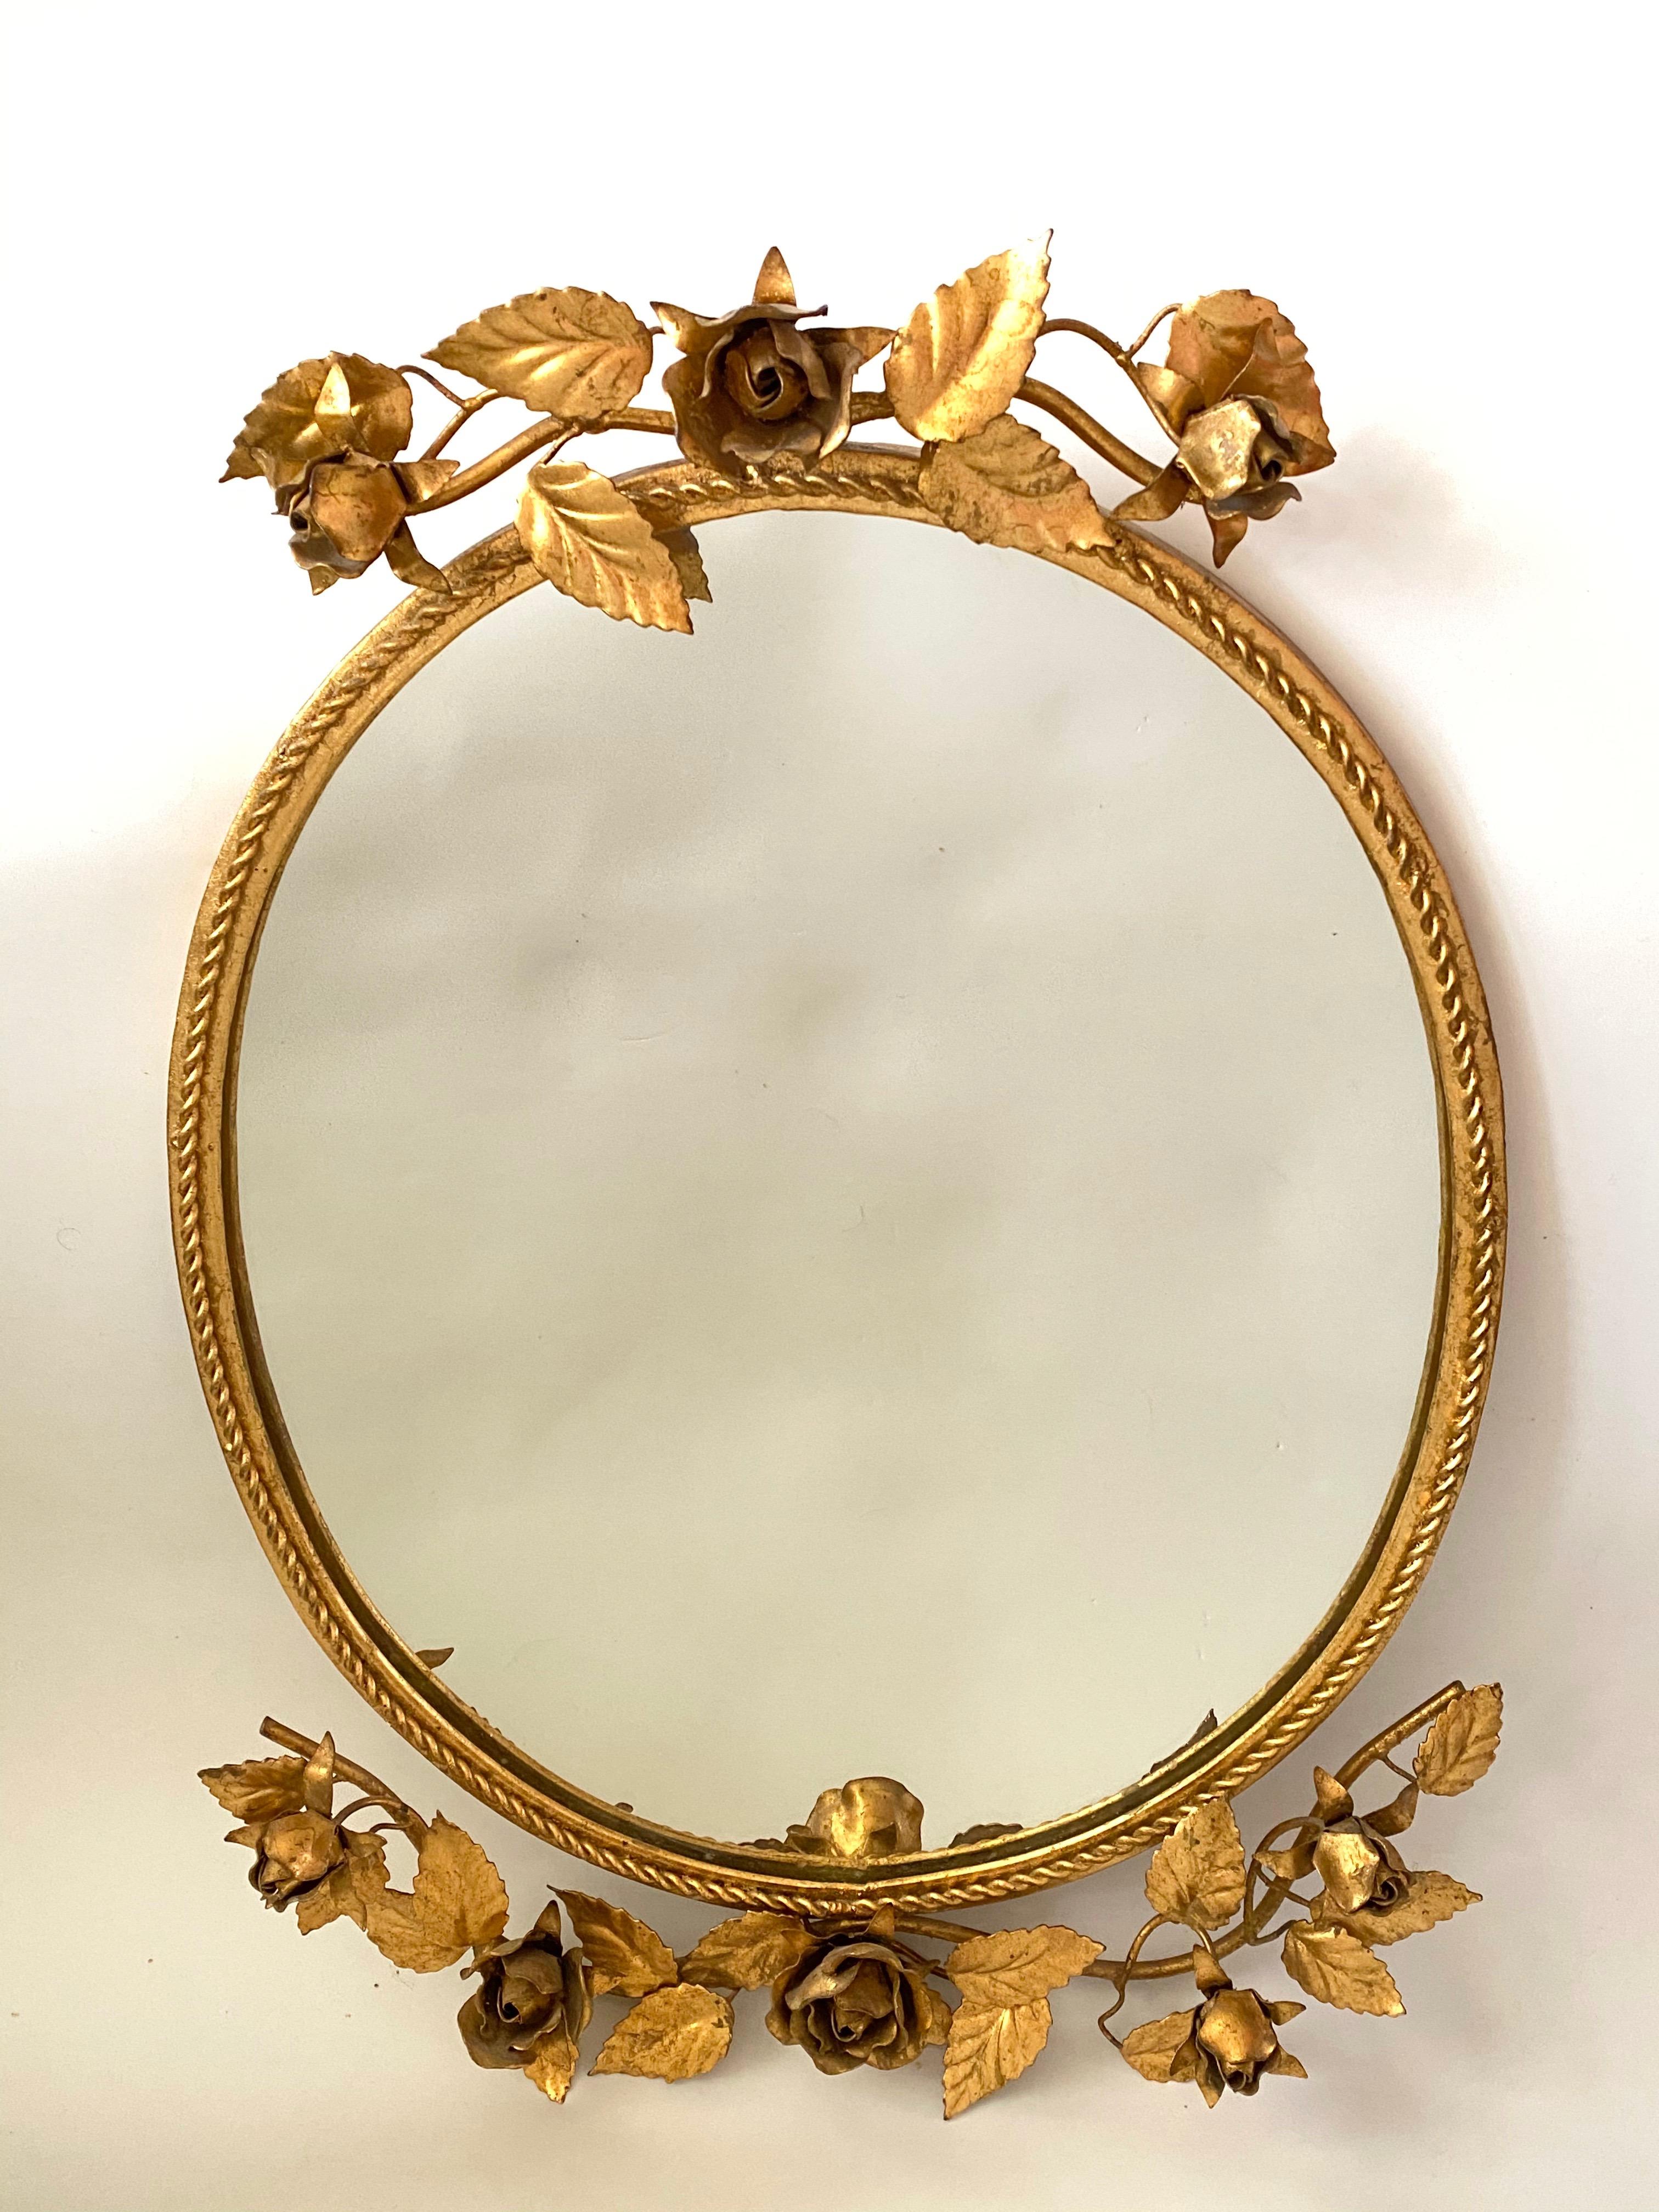 A gorgeous Hollywood Regency mirror. Made of gilded metal. No chips, no cracks, no repairs. It measures approximate 24